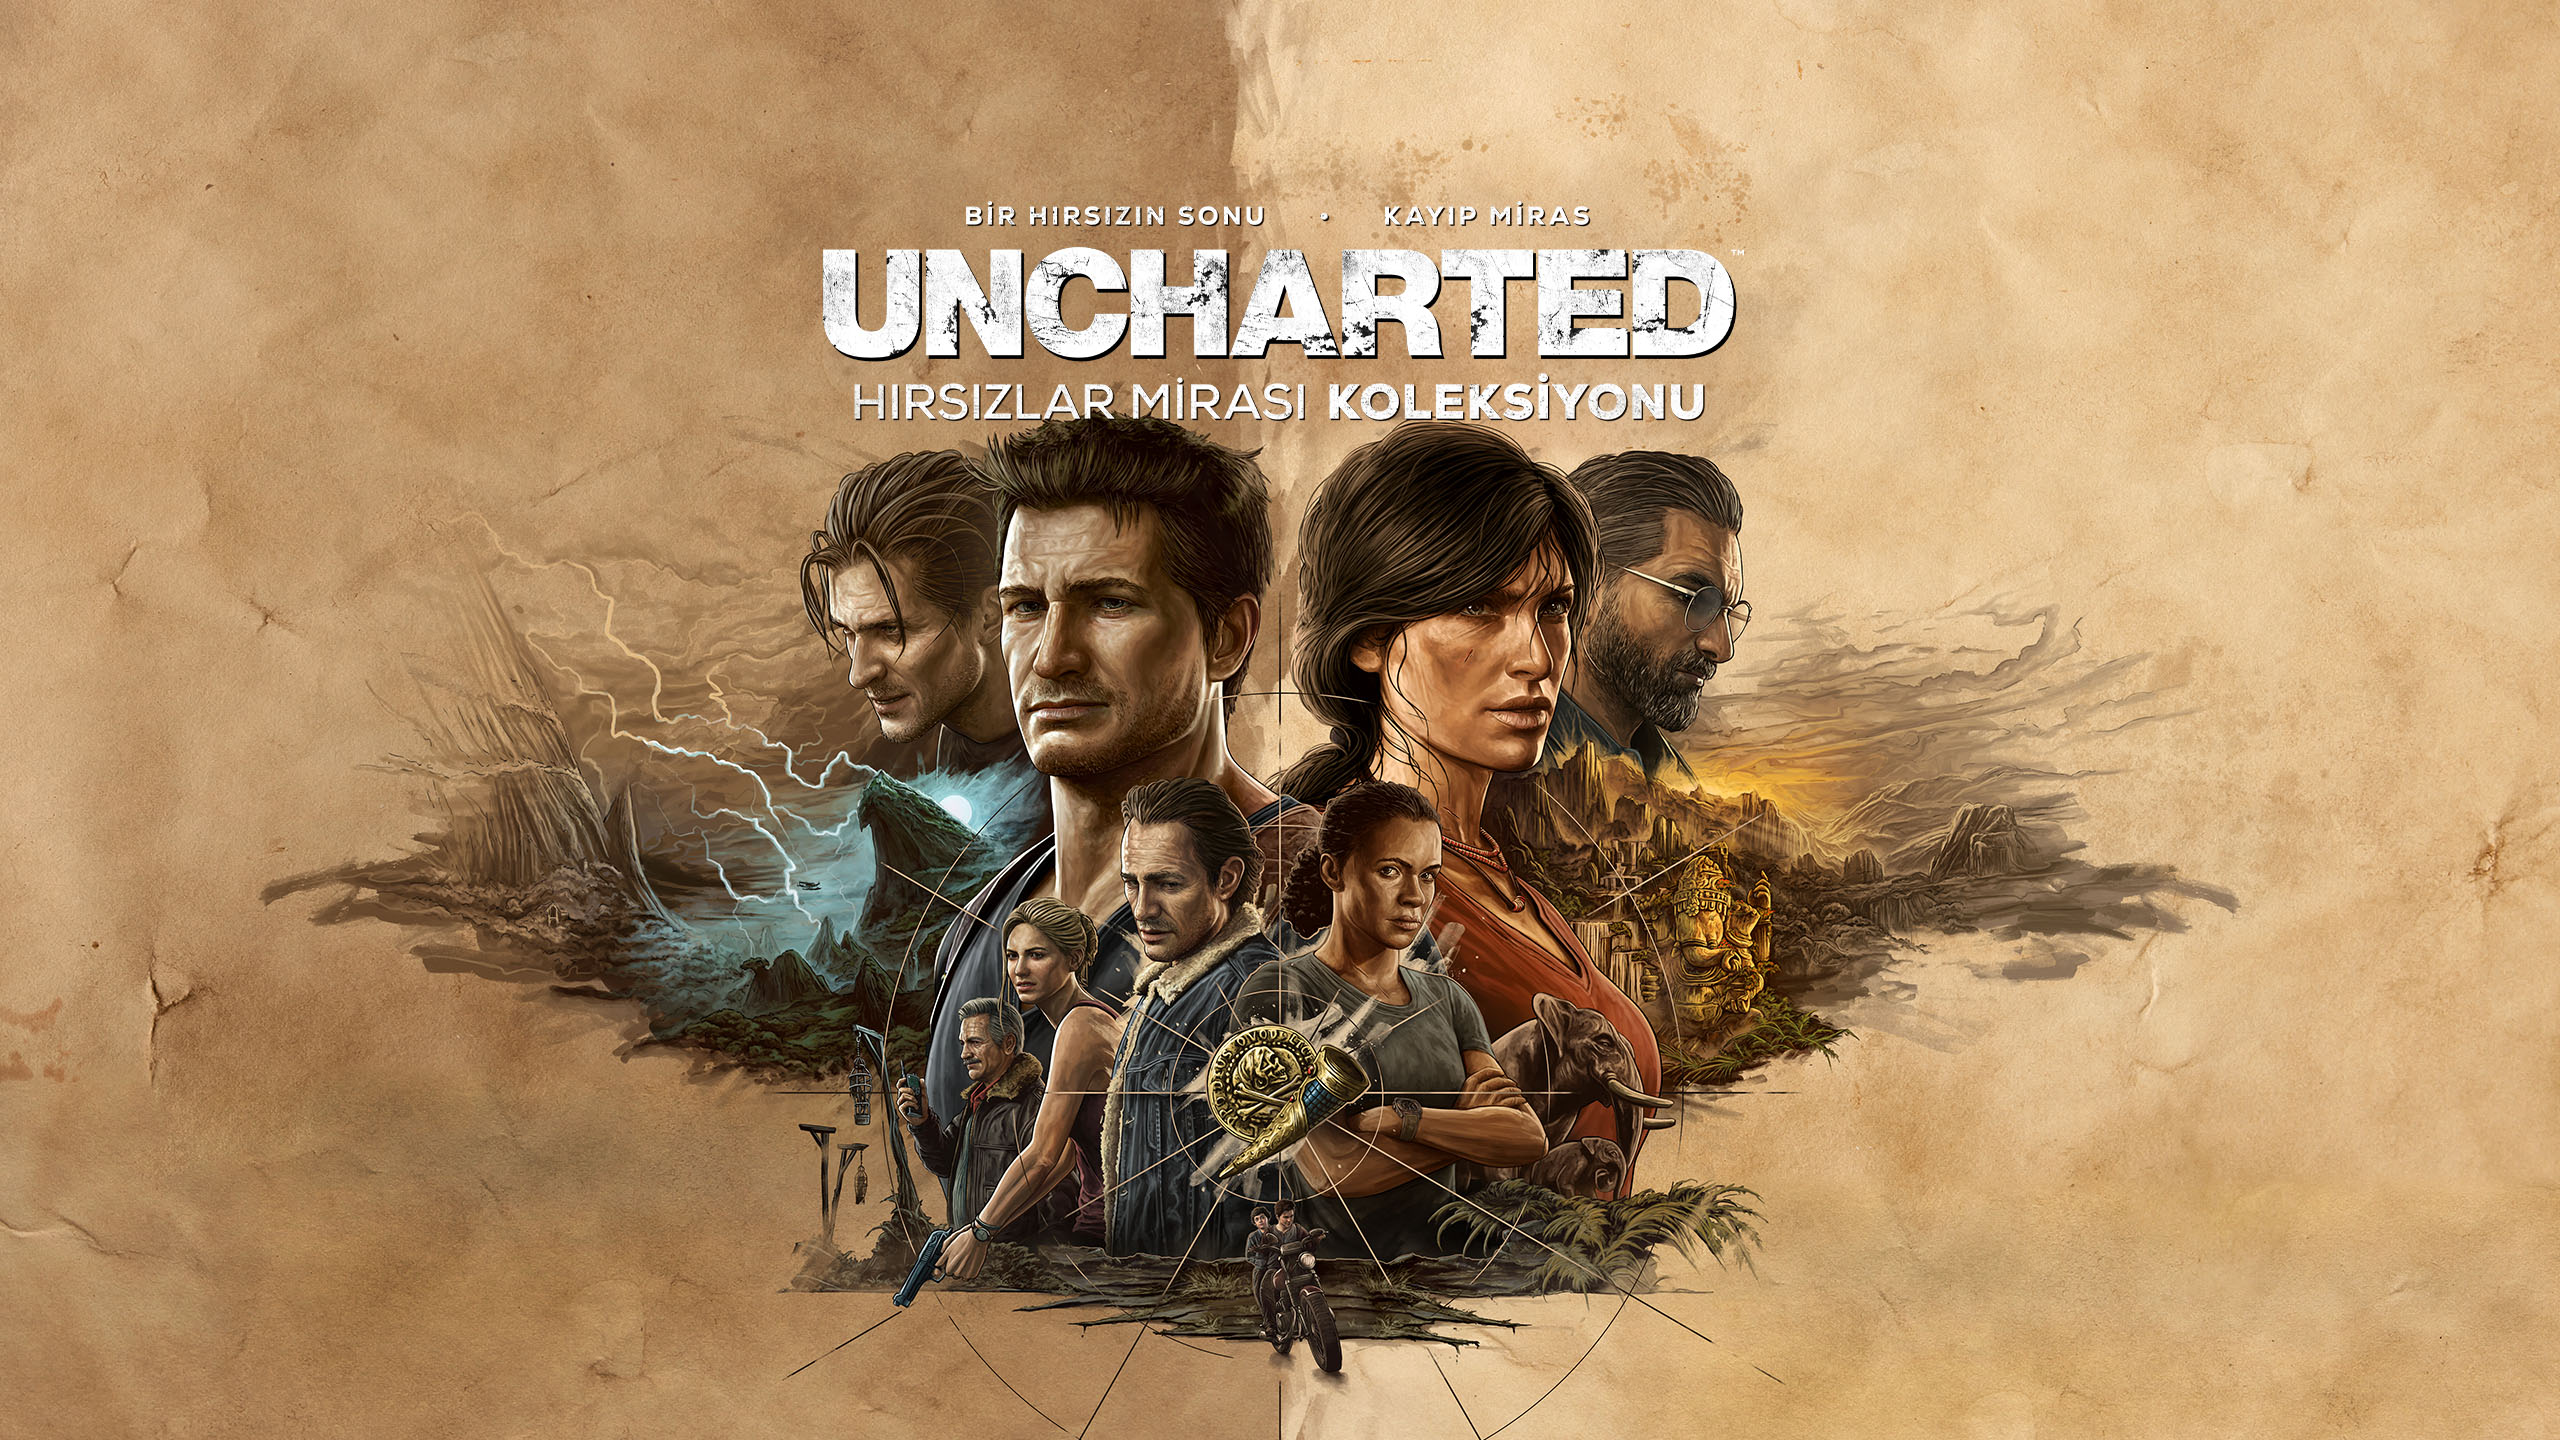 UNCHARTED LEGACY OF THİEVES COLLECTİON